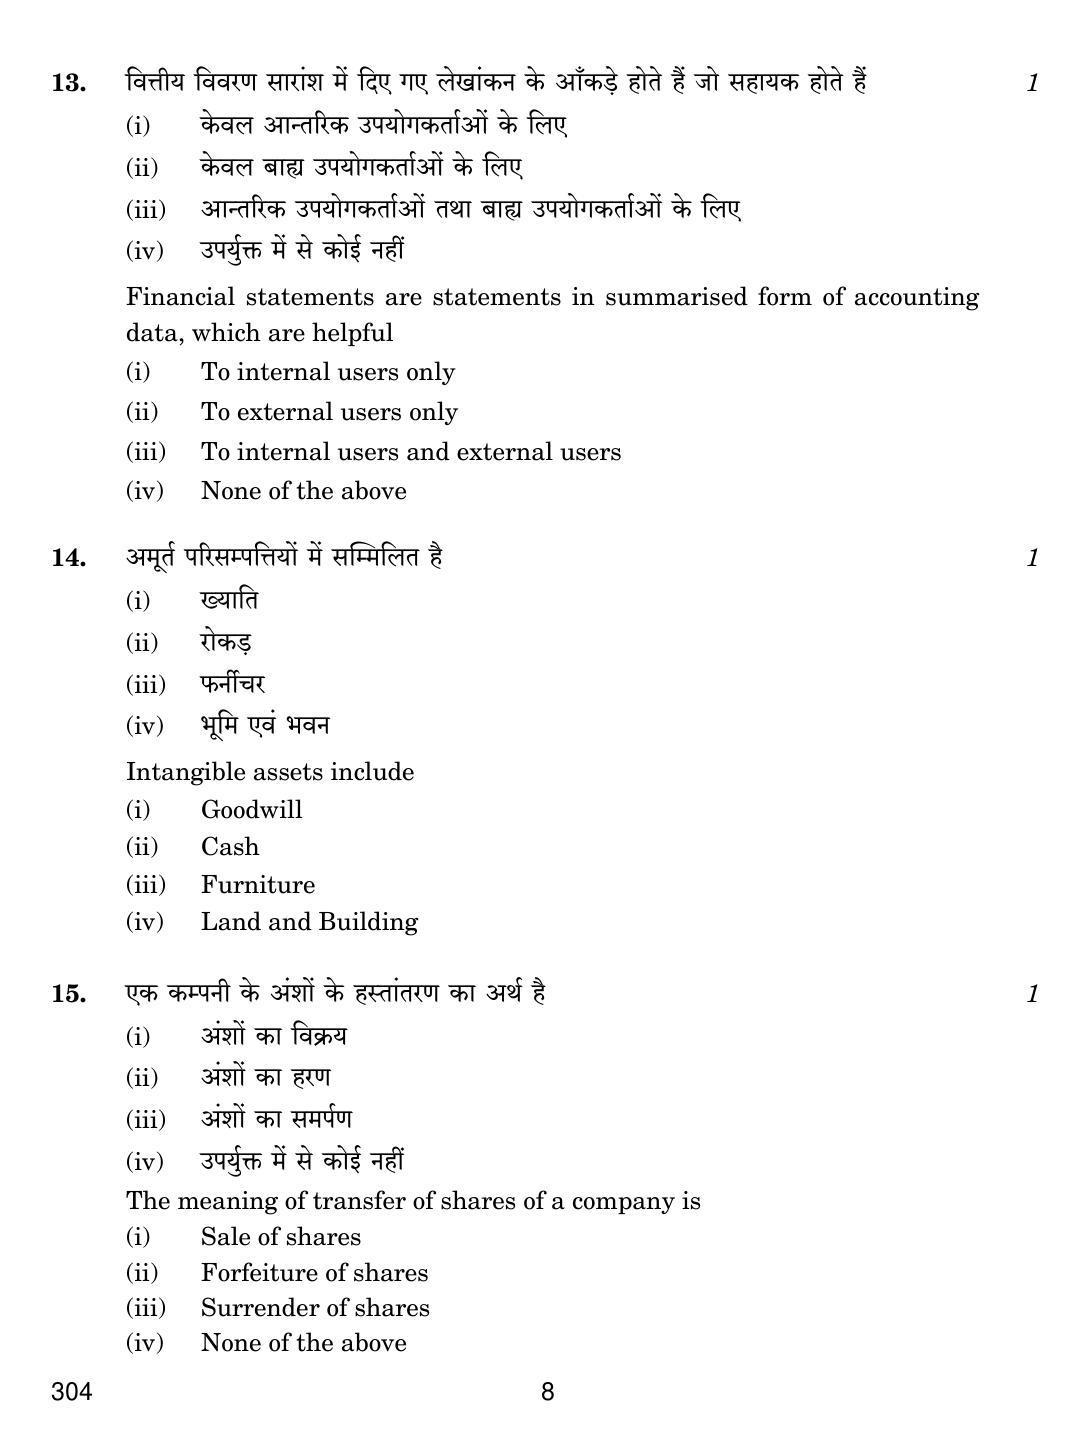 CBSE Class 12 304 FINANCIAL ACCOUNTING 2018 Question Paper - Page 8